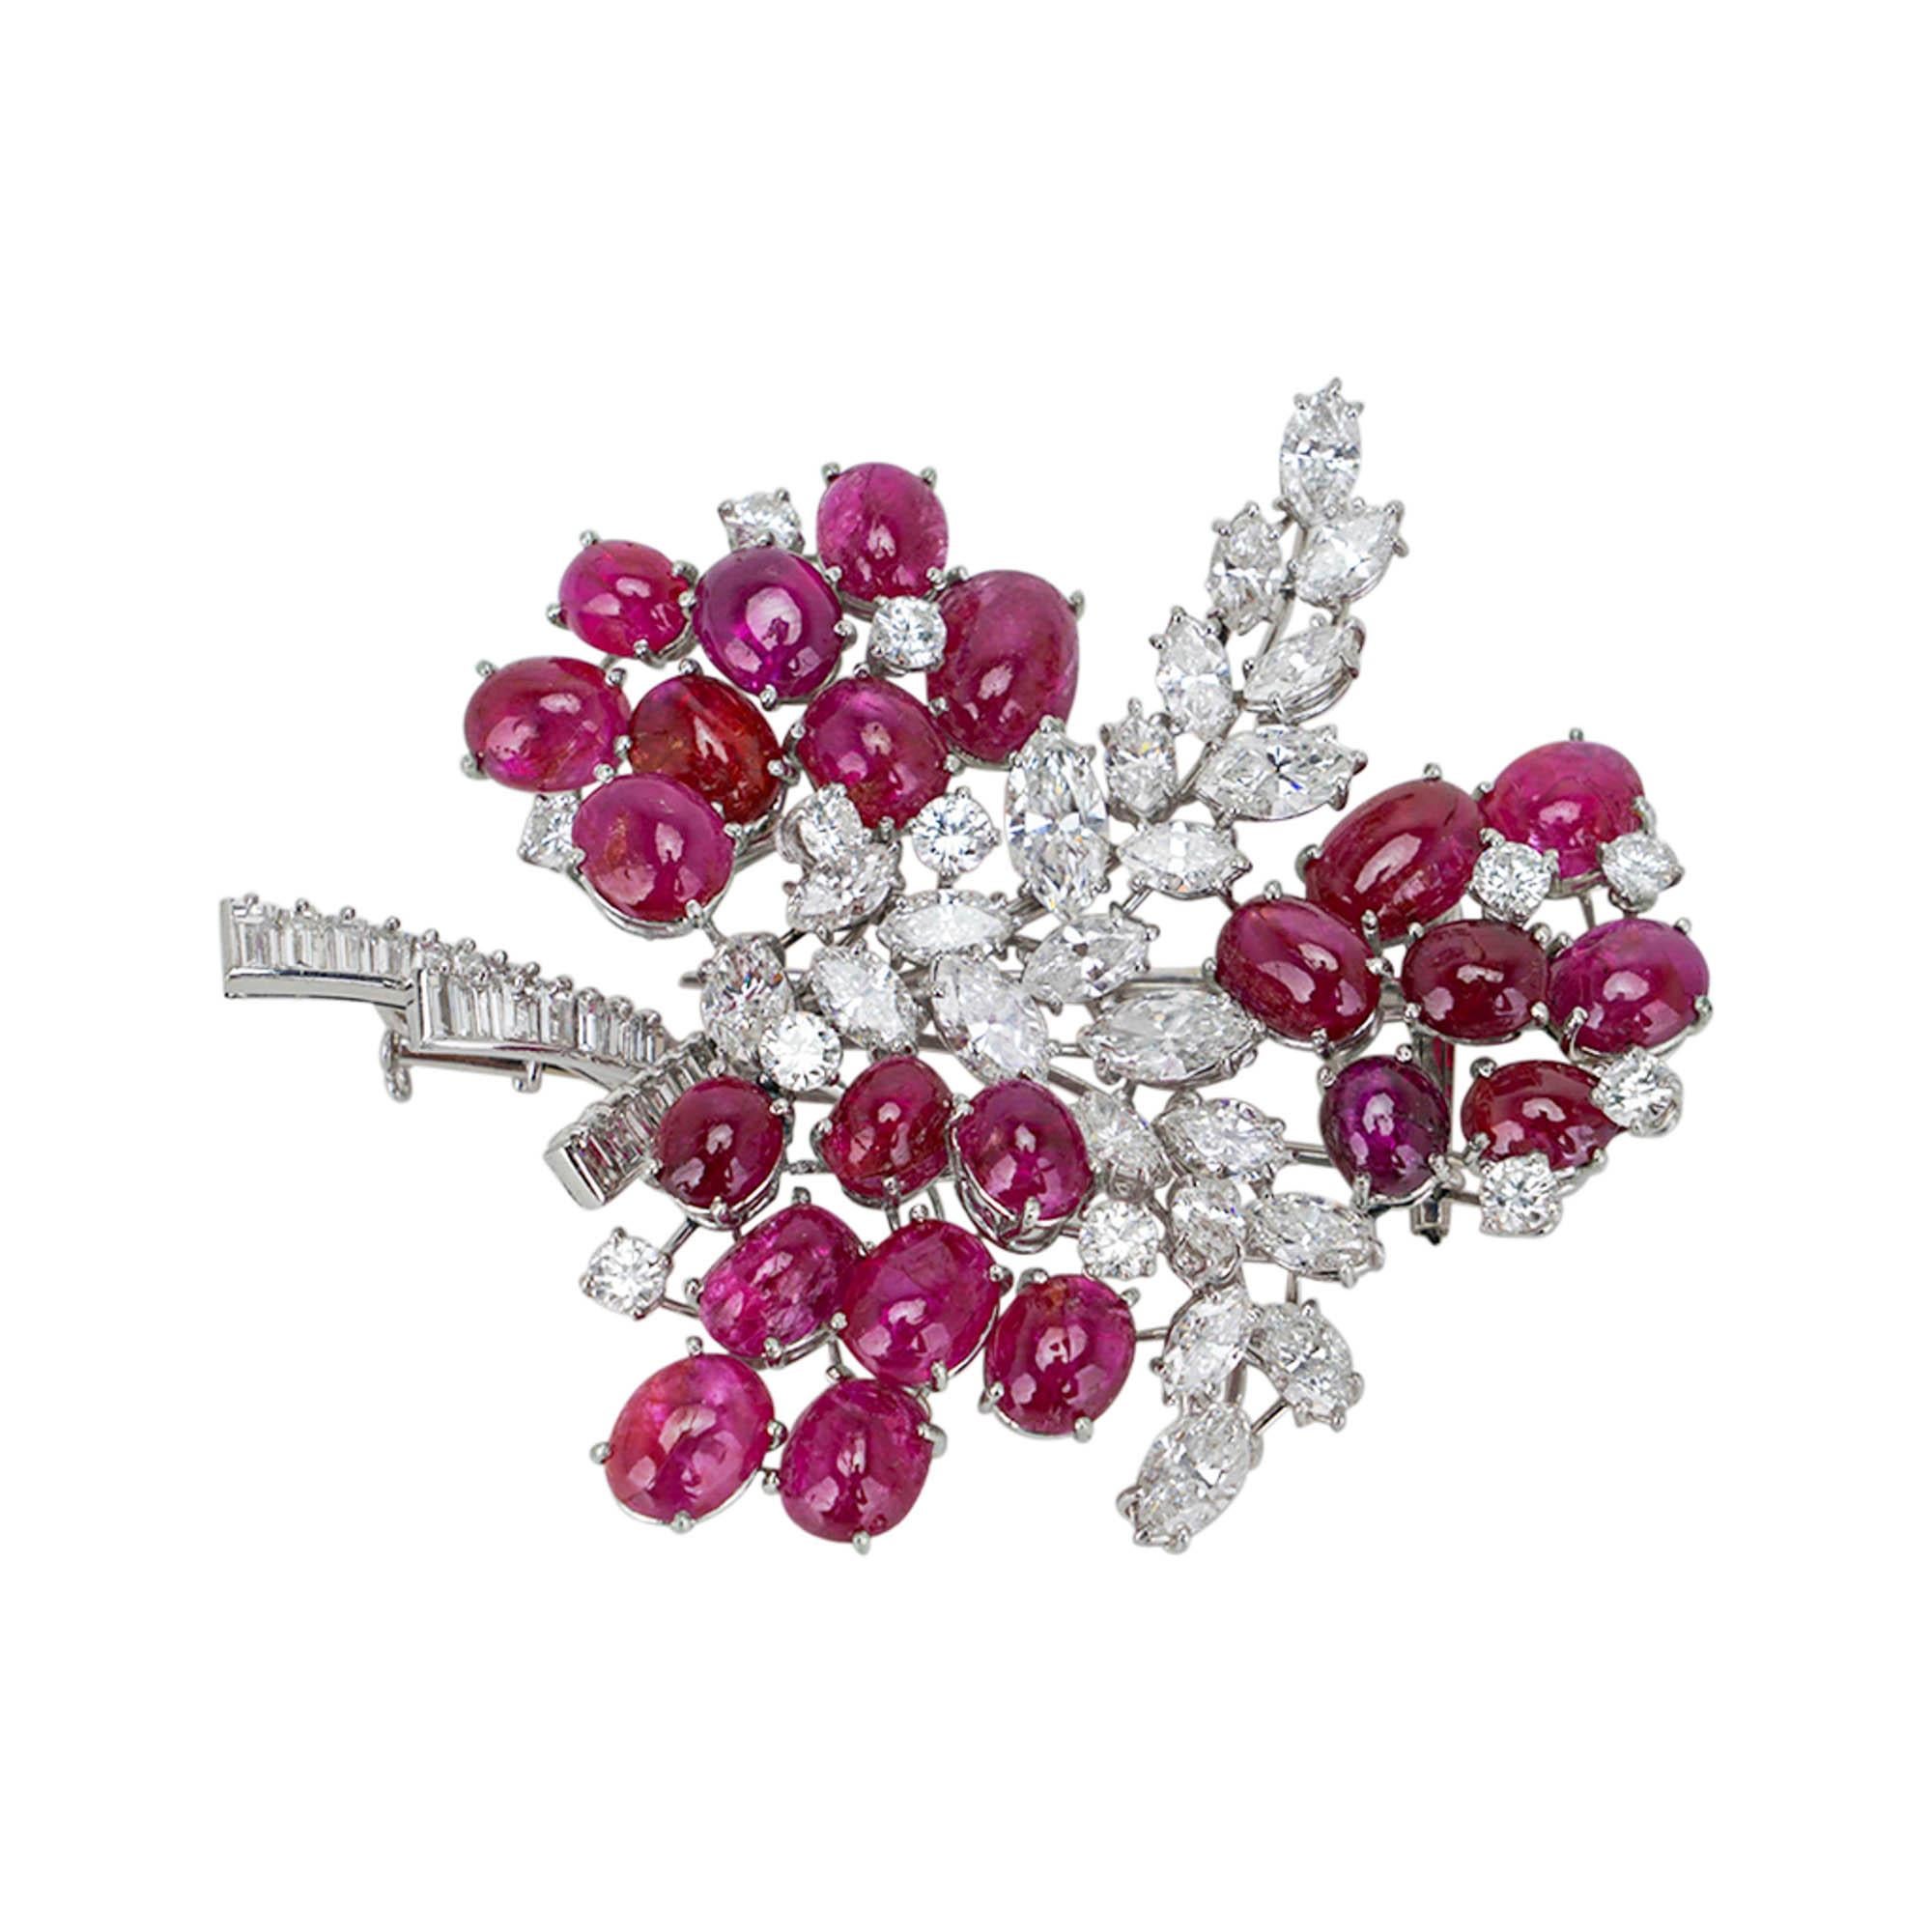 Unbranded vintage circa 1970s' Diamond and Ruby Brooch set in Platinum.
A stunning brooch with 24 Marquise Diamonds Vs1/Vs2 quality +- .25 each for a total of 6 CT.
Interspersed among 23 Cabochon Rubies with +- 13.8 CT.
12 Round Diamonds Vs1/Vs2